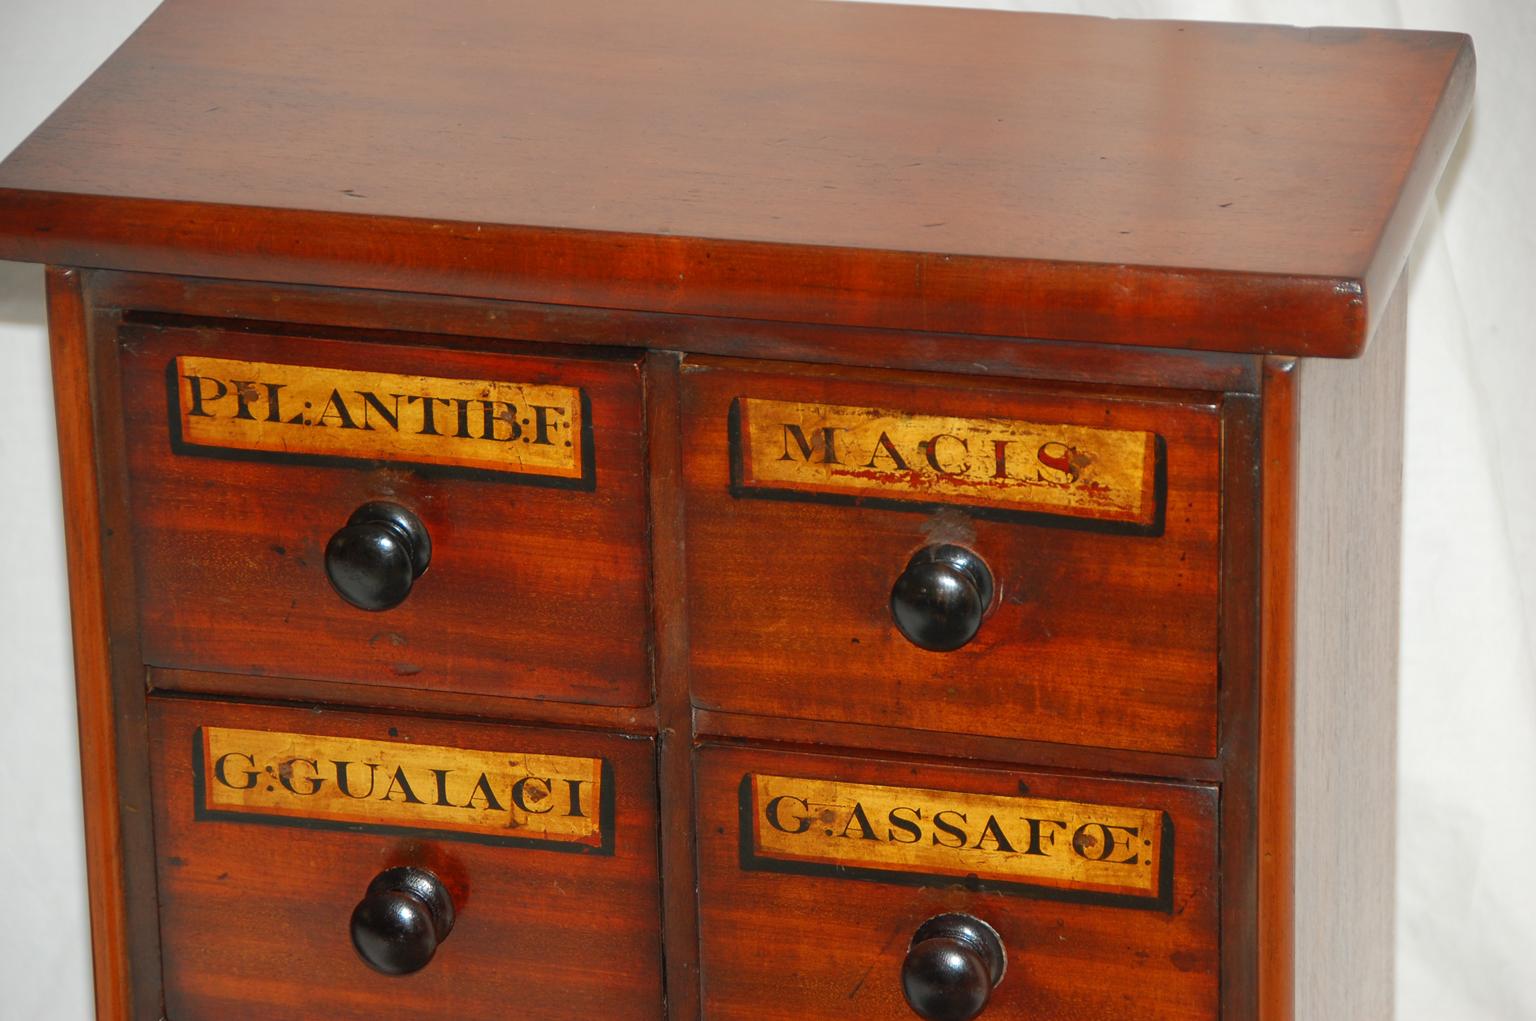 English Victorian period pair of small cabinets made from mahogany apothecary drawers with original labels. These were originally built into a wall of an English 19th century pharmacy and have now been reconstructed as a pair of side cabinets of